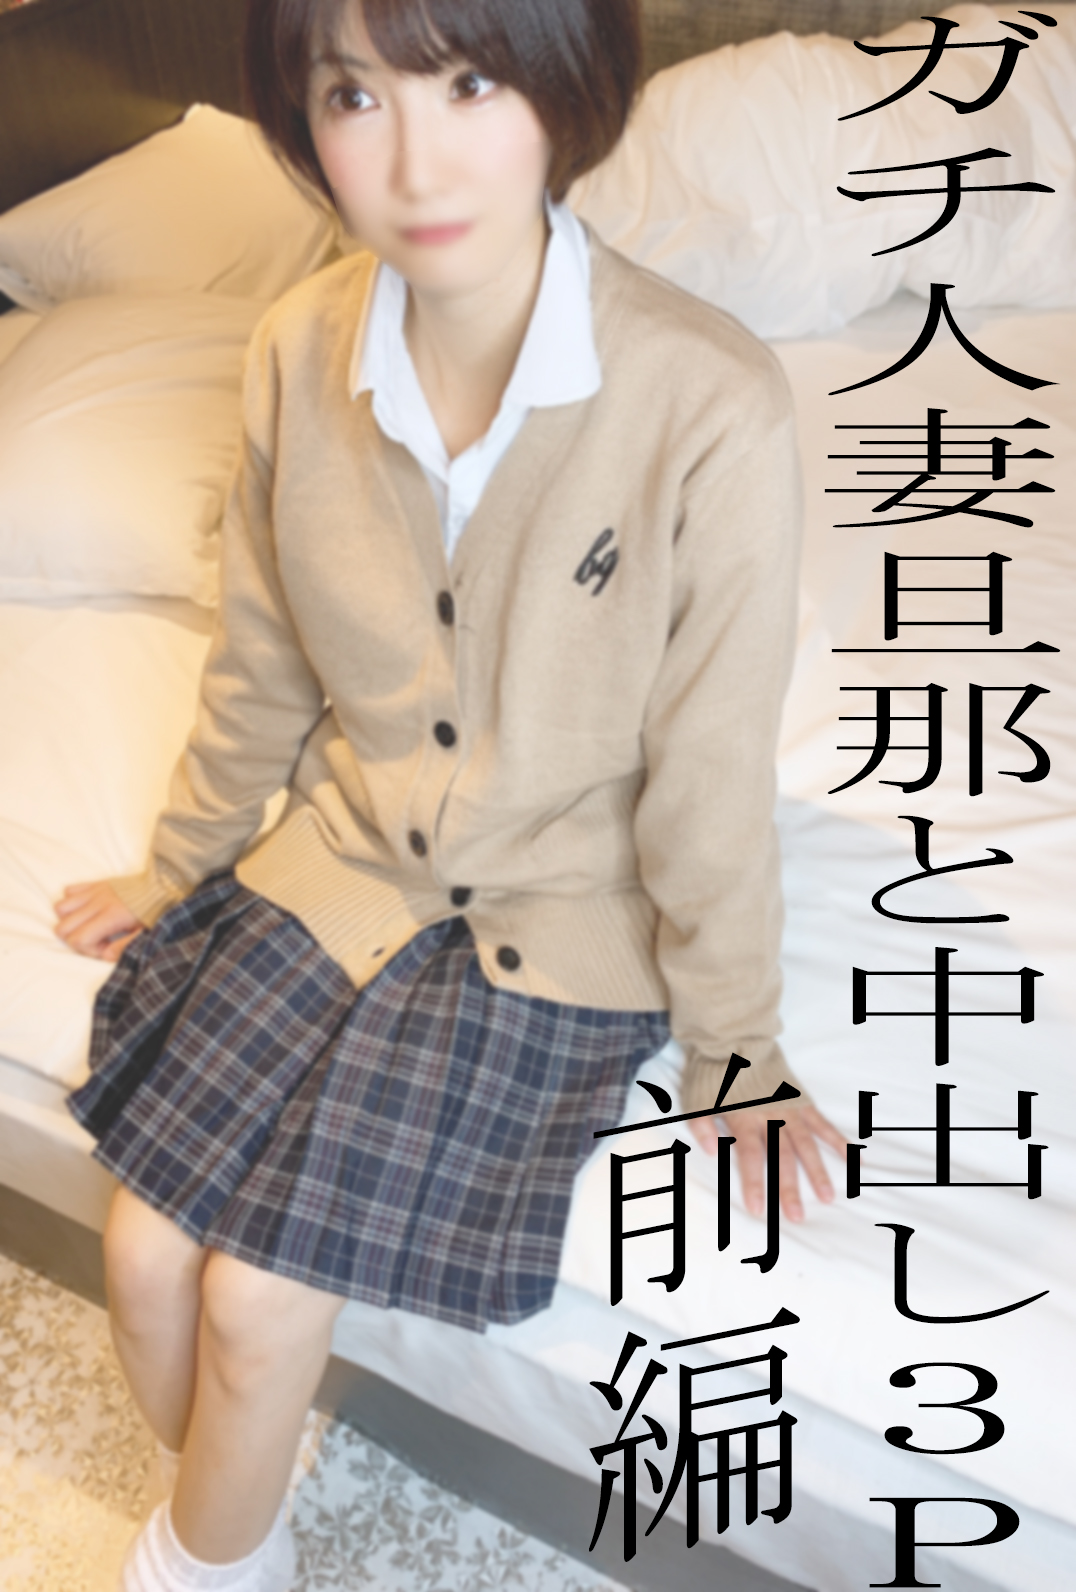 All without moza is a review privilege Real married woman KUREHAs sleeping cum shot 3P Part 1 Husband is cum shot in a married woman who is usually cool but shy with gal uniform costume 50 limited 1480pt